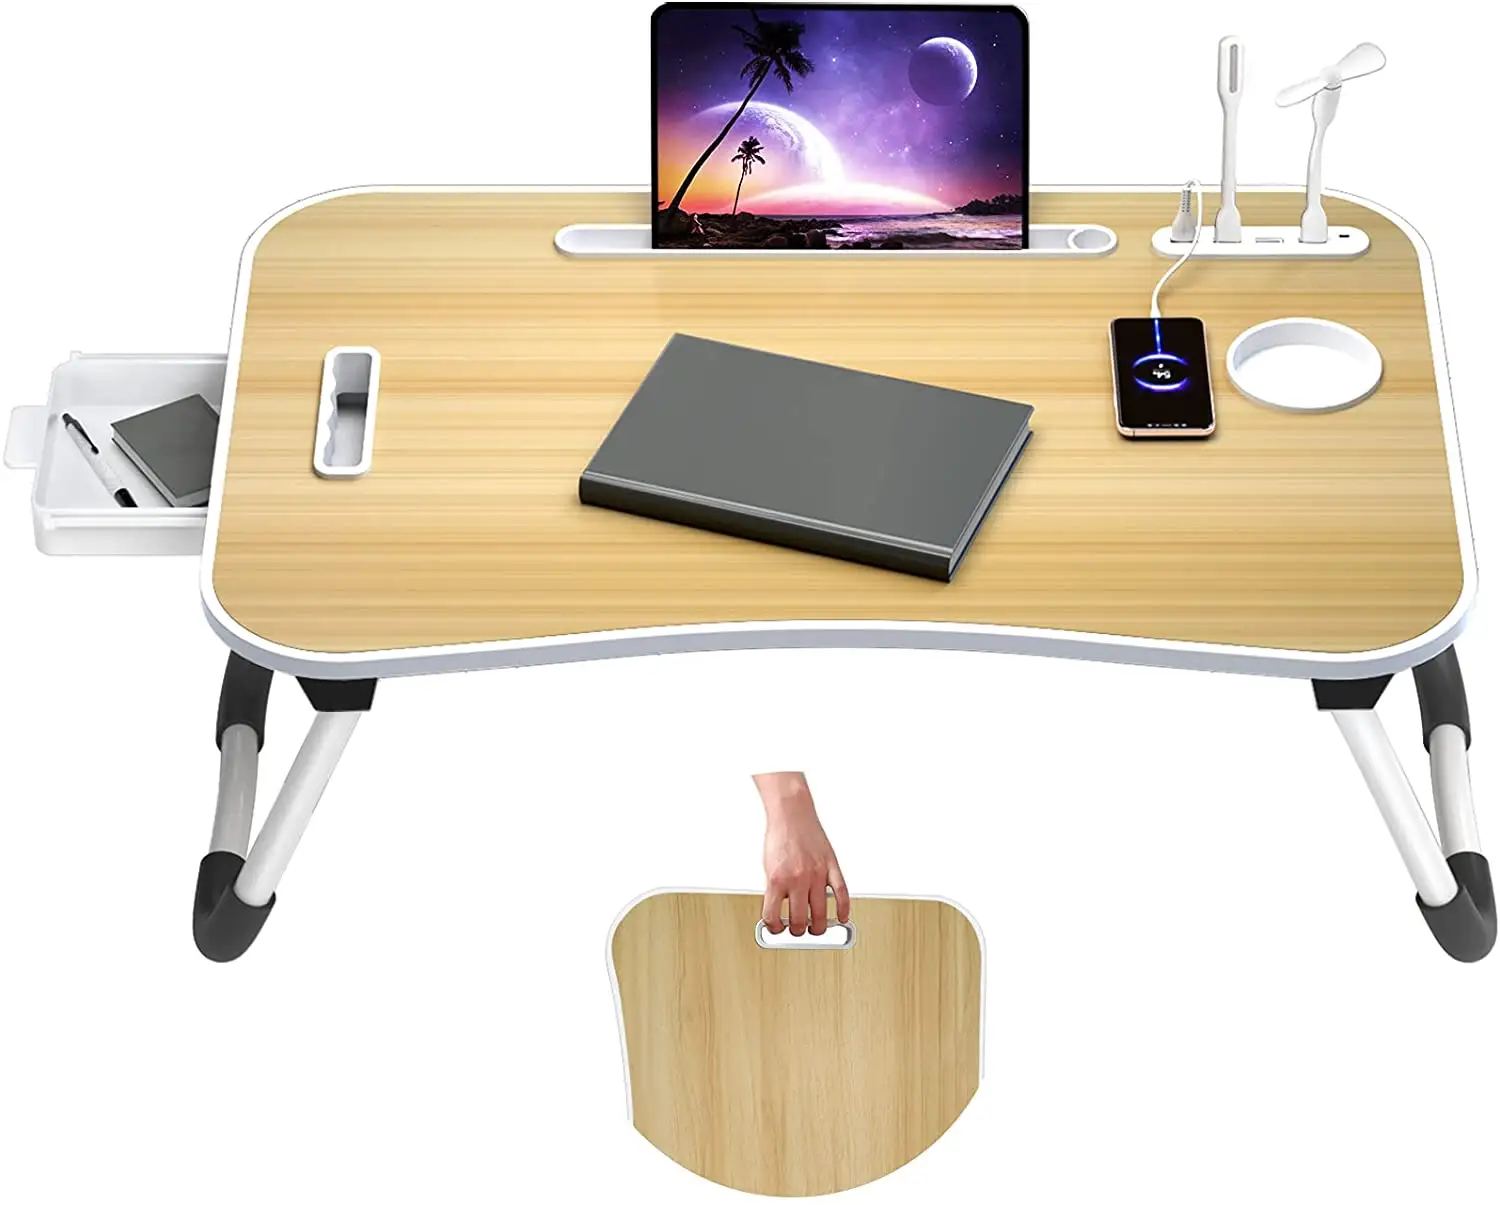 Laptop Lap Bed Desk, Portable Foldable Laptop Tray Table with Handle USB Charge Port, Storage Drawer Cup Holder, Lamp, Fan